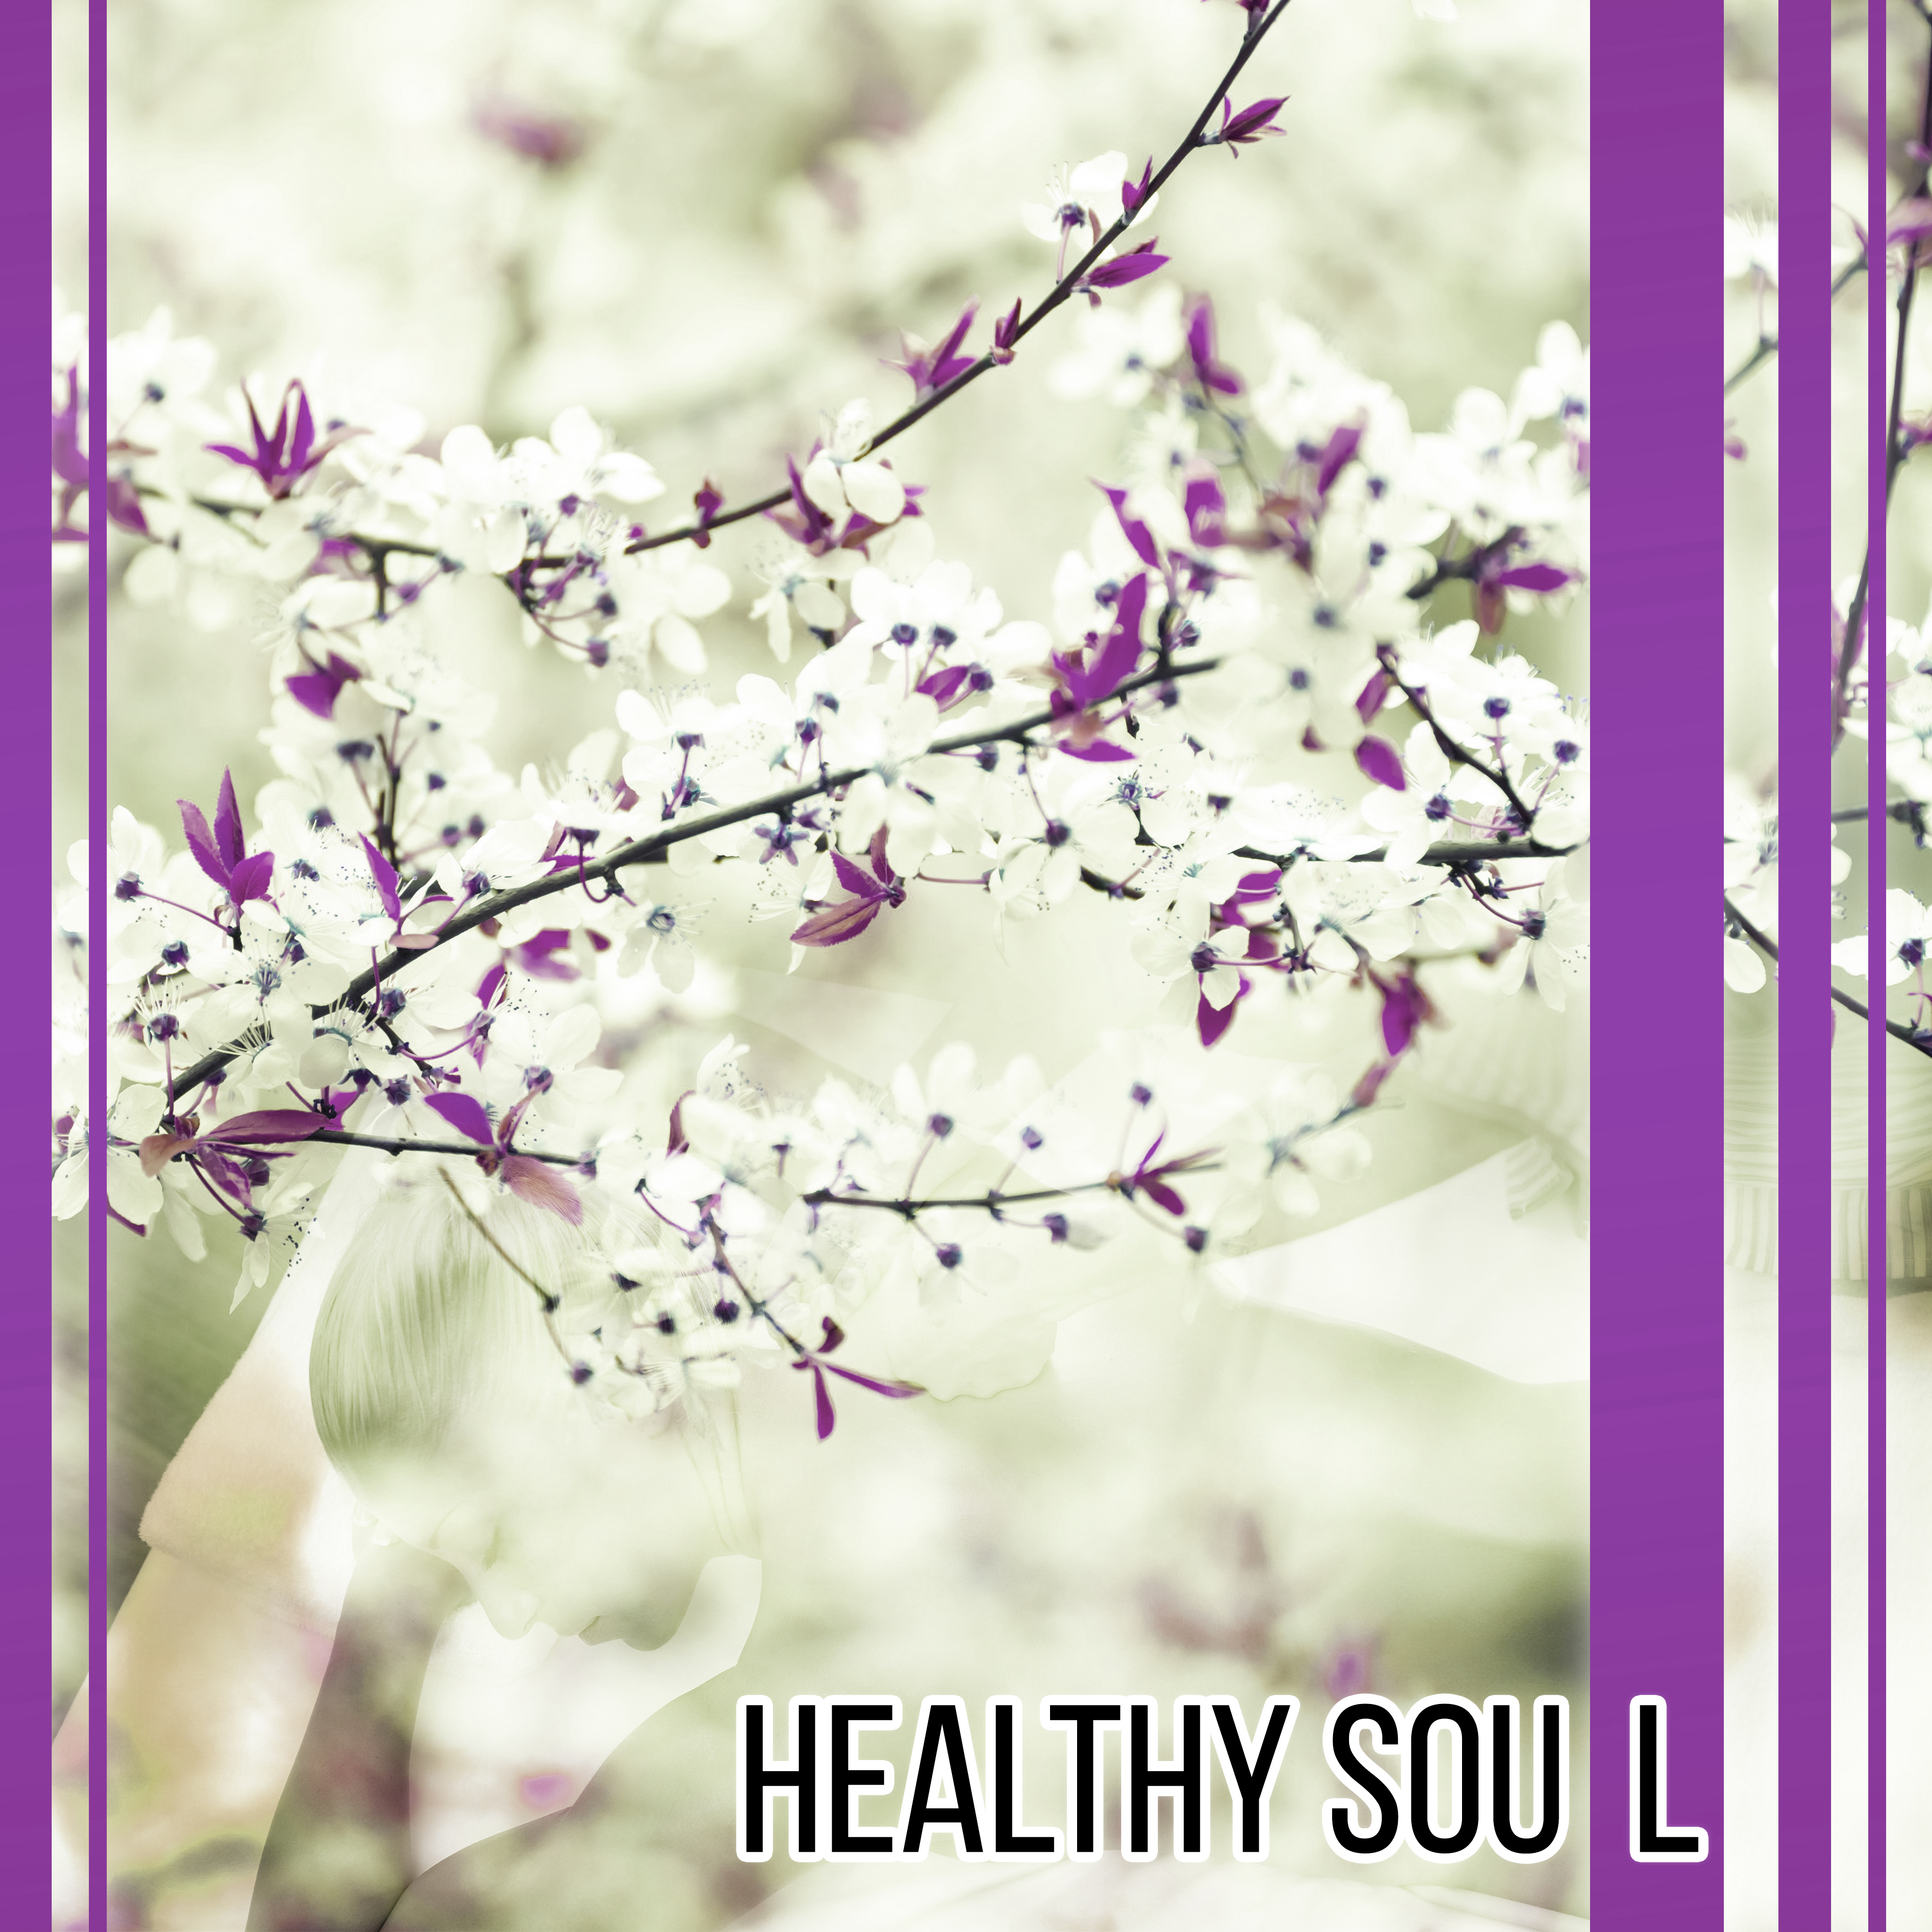 Healthy Soul  Relaxation Sounds for Wellness, Spa Music, Deep Massage, Reiki Music, Beauty for Body, Asian Spa, Healing Melodies for Relaxation